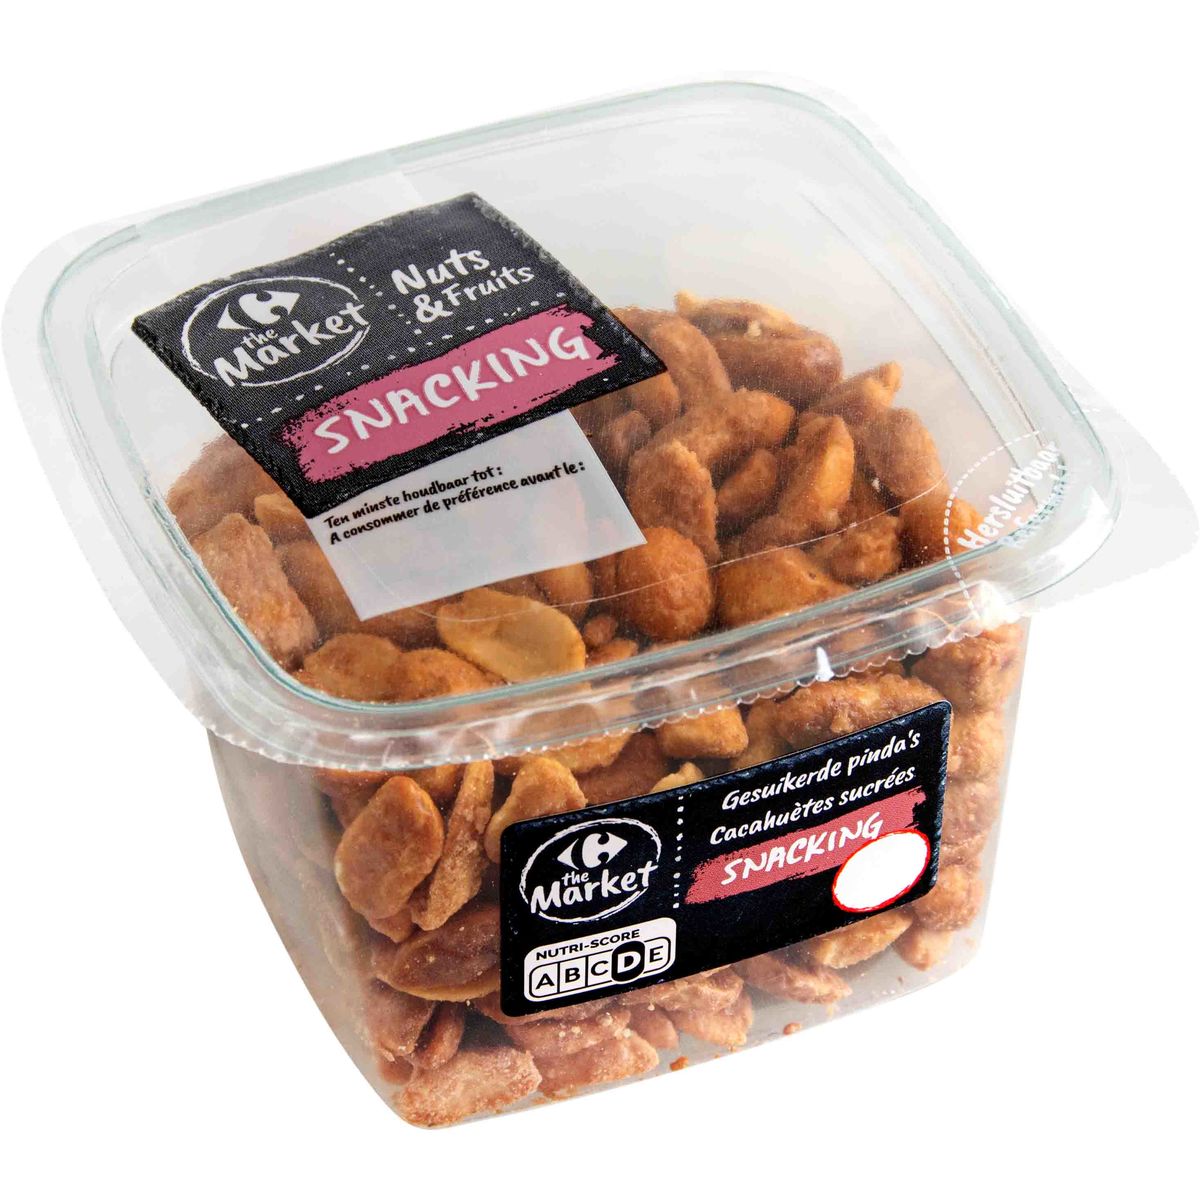 Carrefour The Market Nuts & Fruits Snacking Gesuikerde Pinda's 180 g